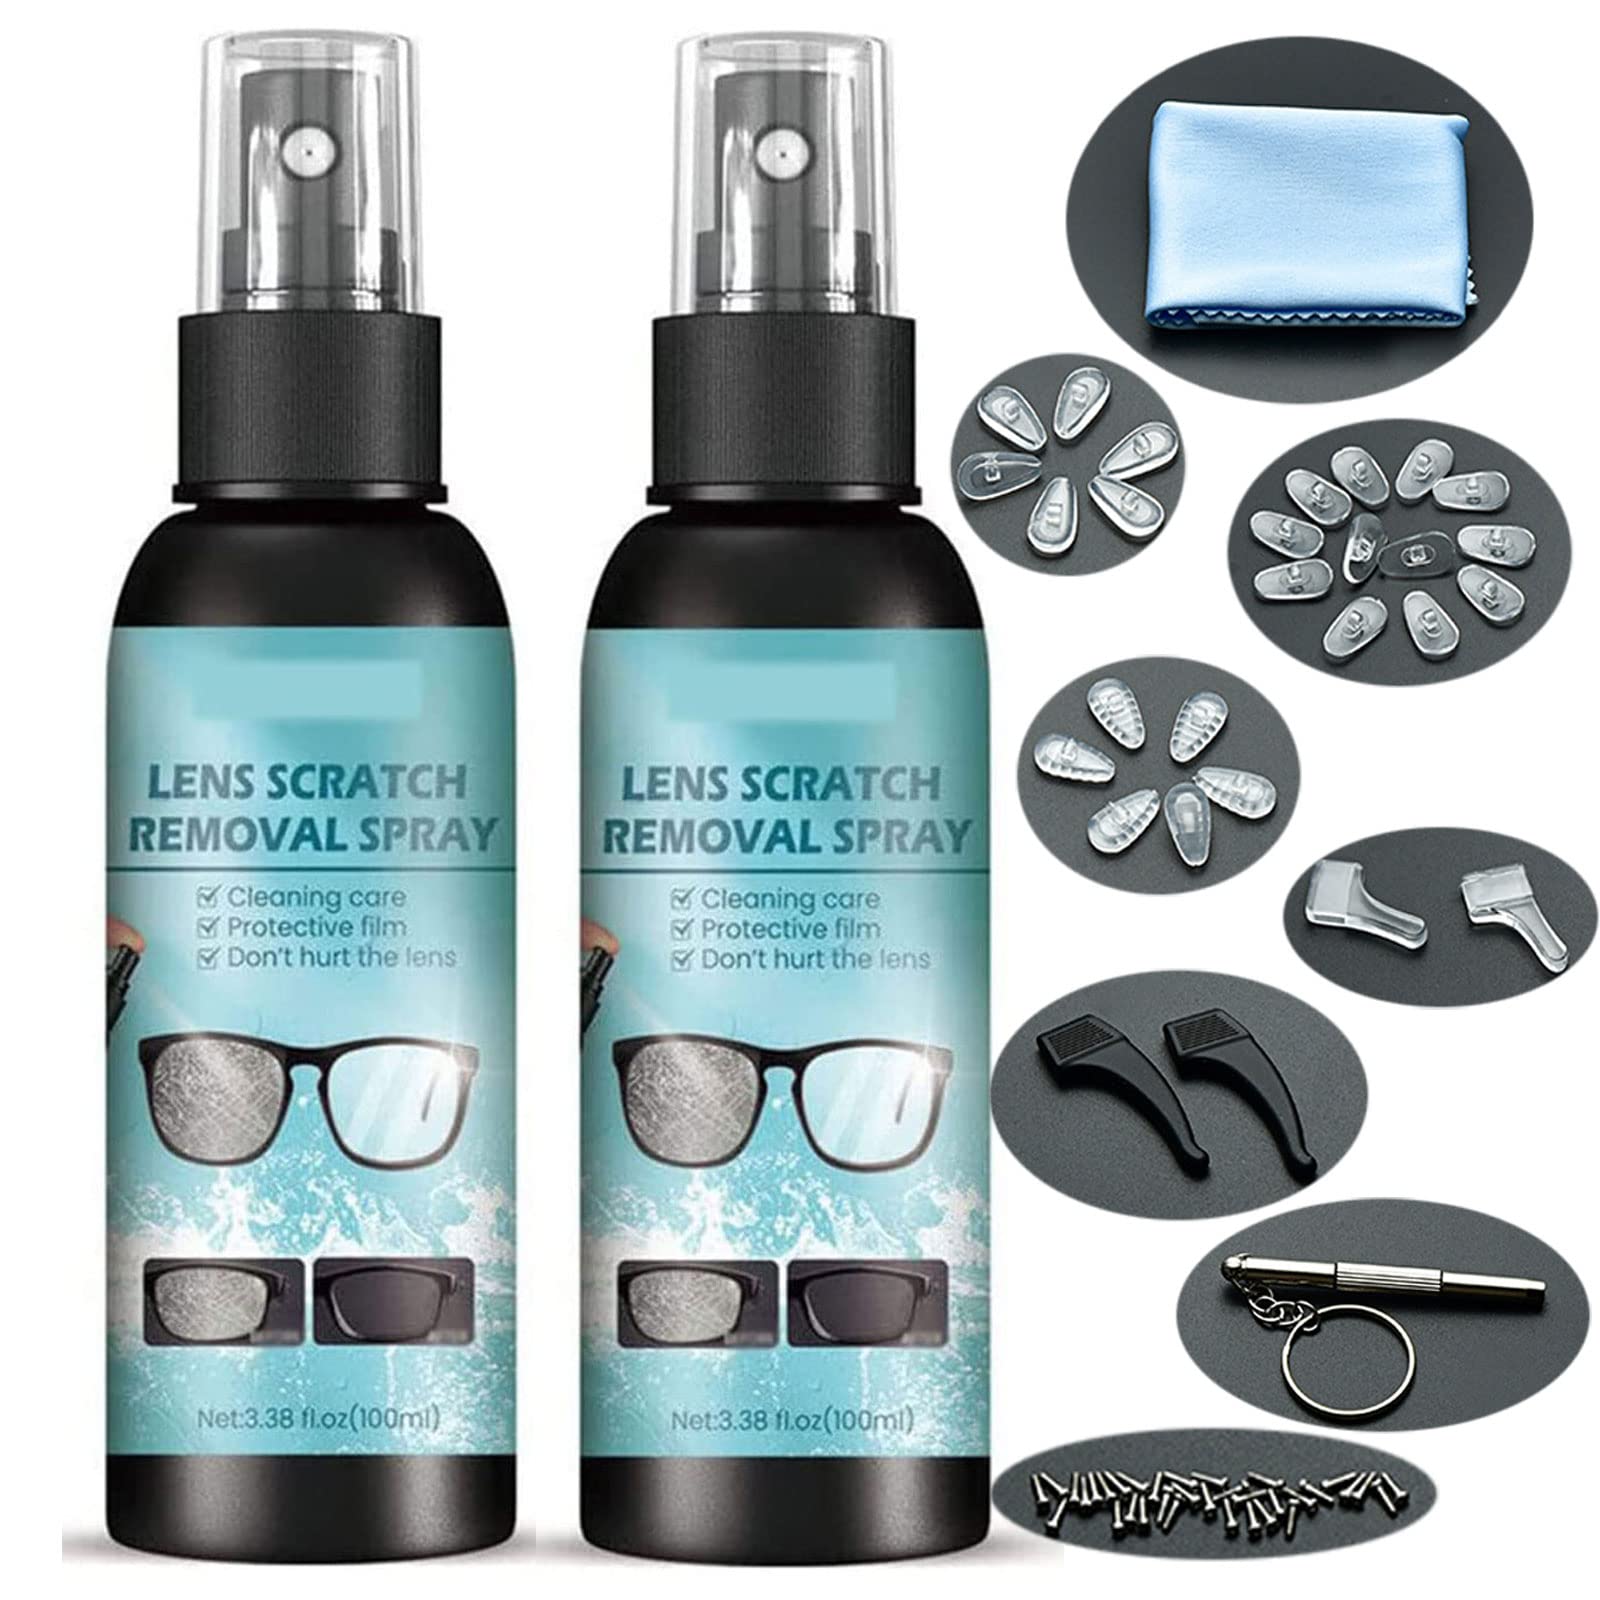  Eyeglass Lens Scratch Removal Spray, 2023 New Eyeglass  Windshield Glass Repair Liquid, Eyeglass Glass Scratch Repair Solution,  Lens Scratch Remover, Eyeglass Cleaning Tools for Lenses Screens (1PC) :  Health & Household